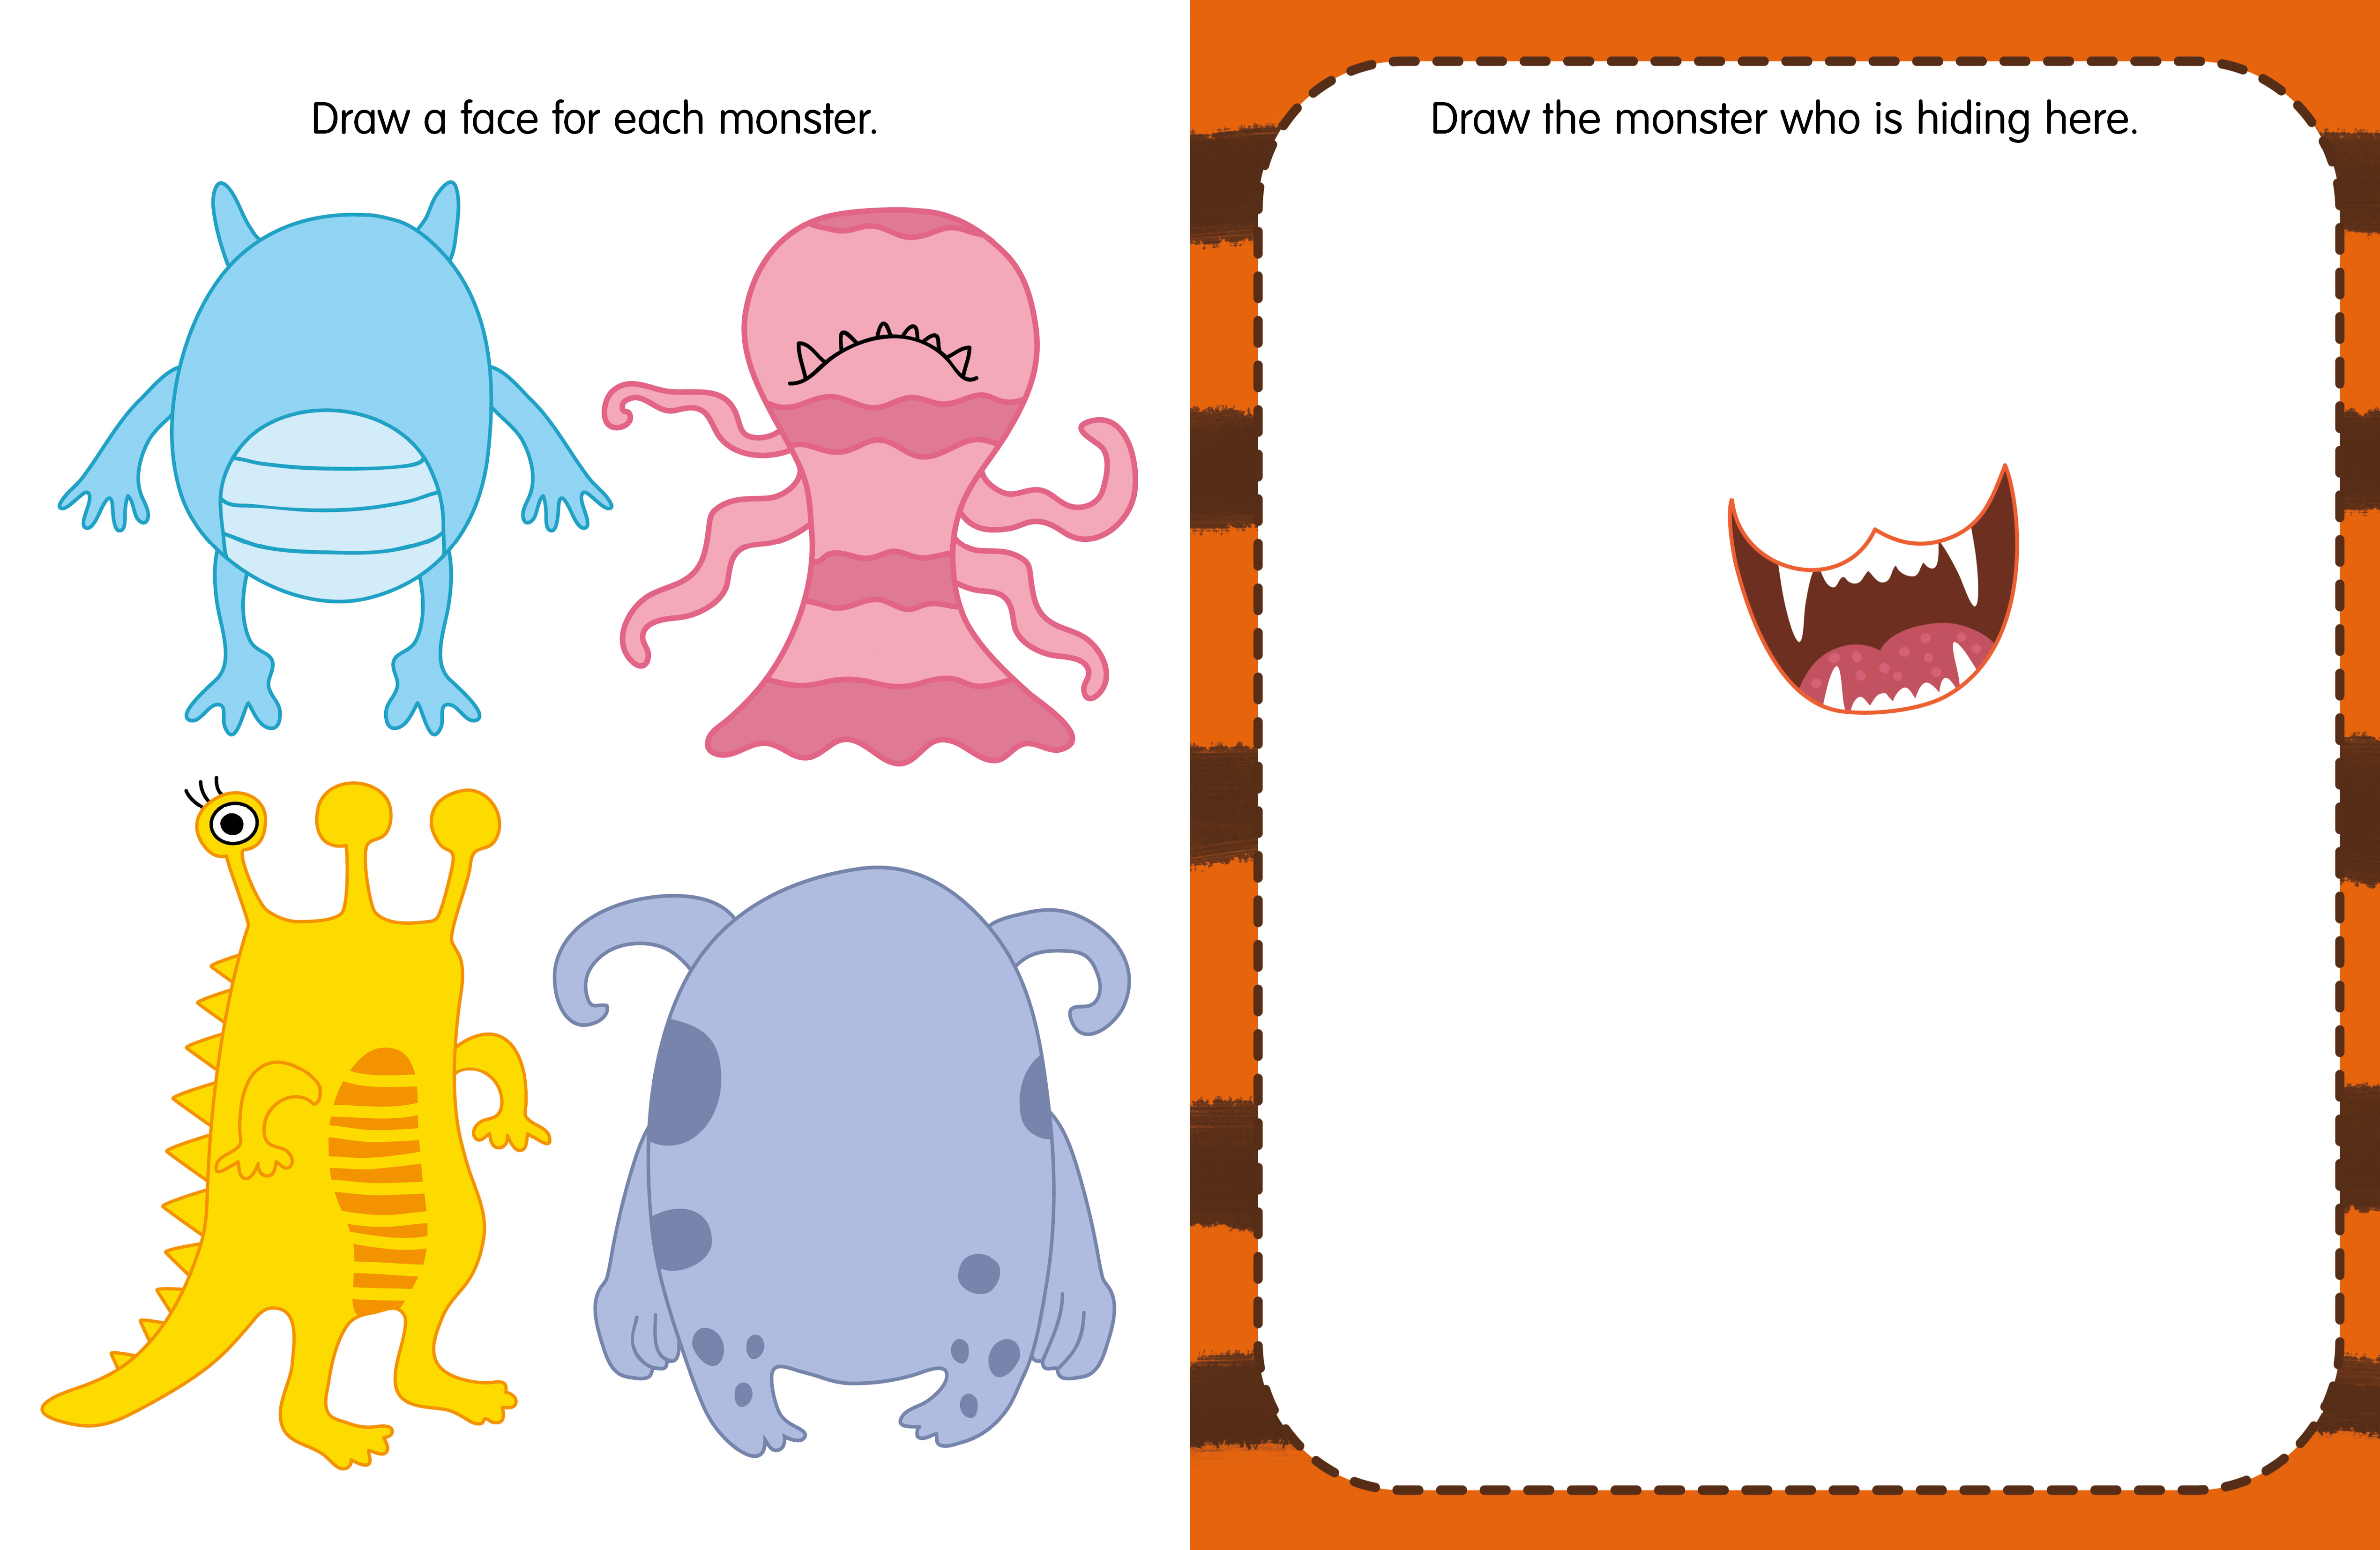 Adventures with Imaginary Creatures Activity Book